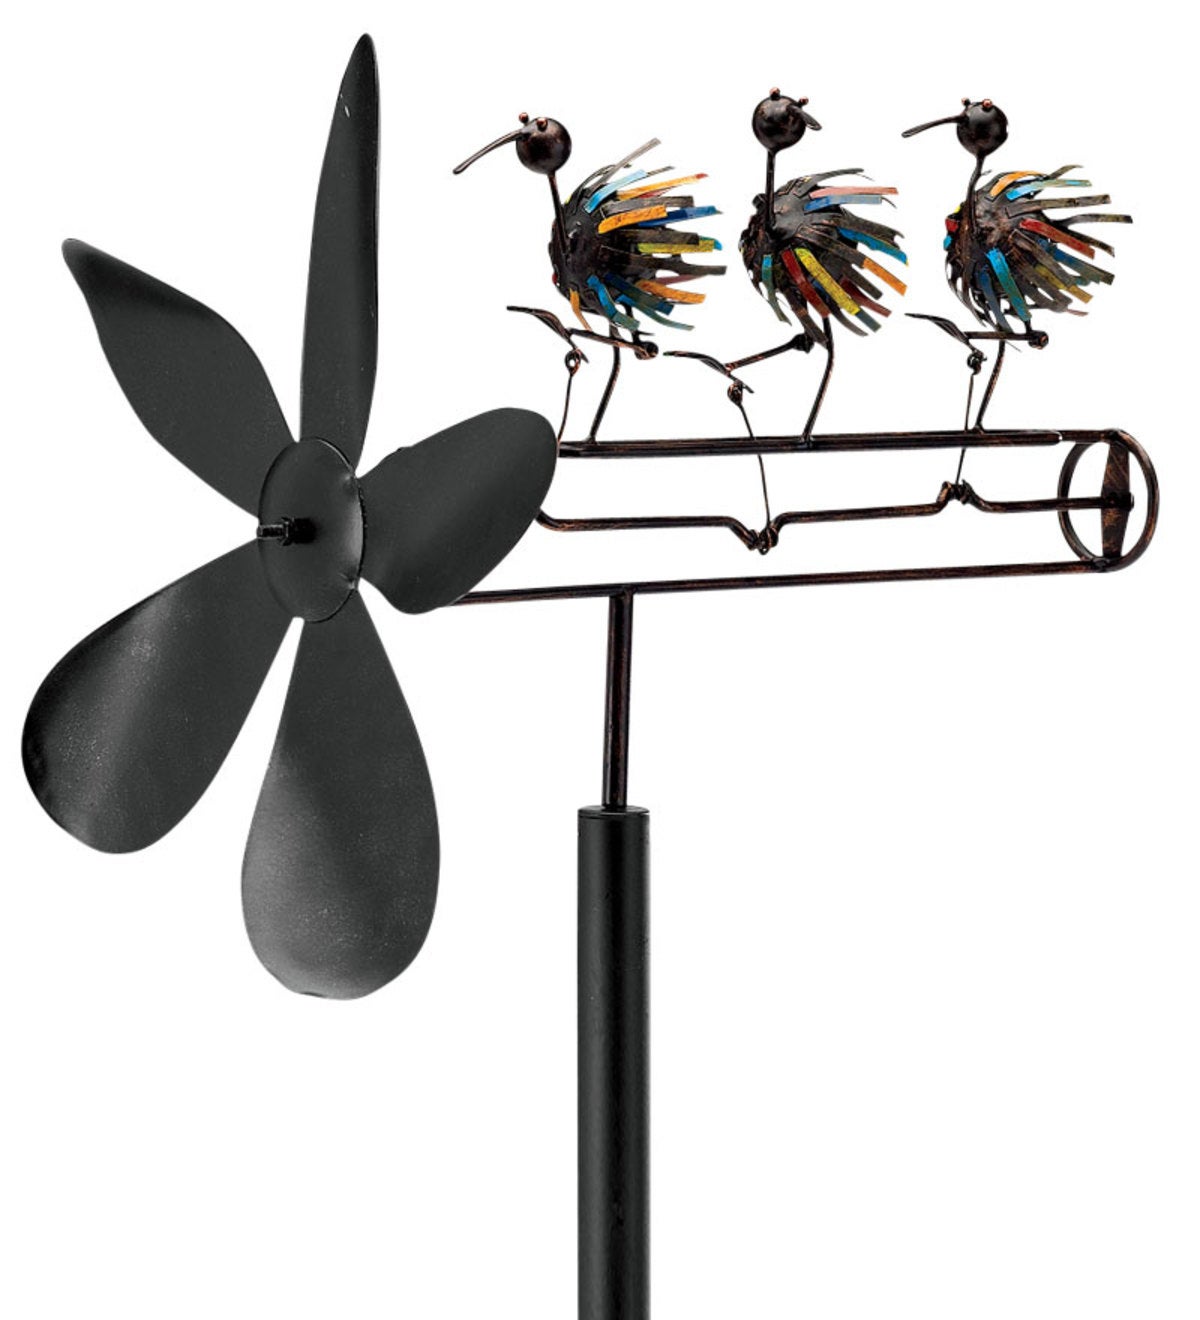 Island Parrot Staked Wind Whirli Wing 12" Whirligig Spinner 15...PR 21898 